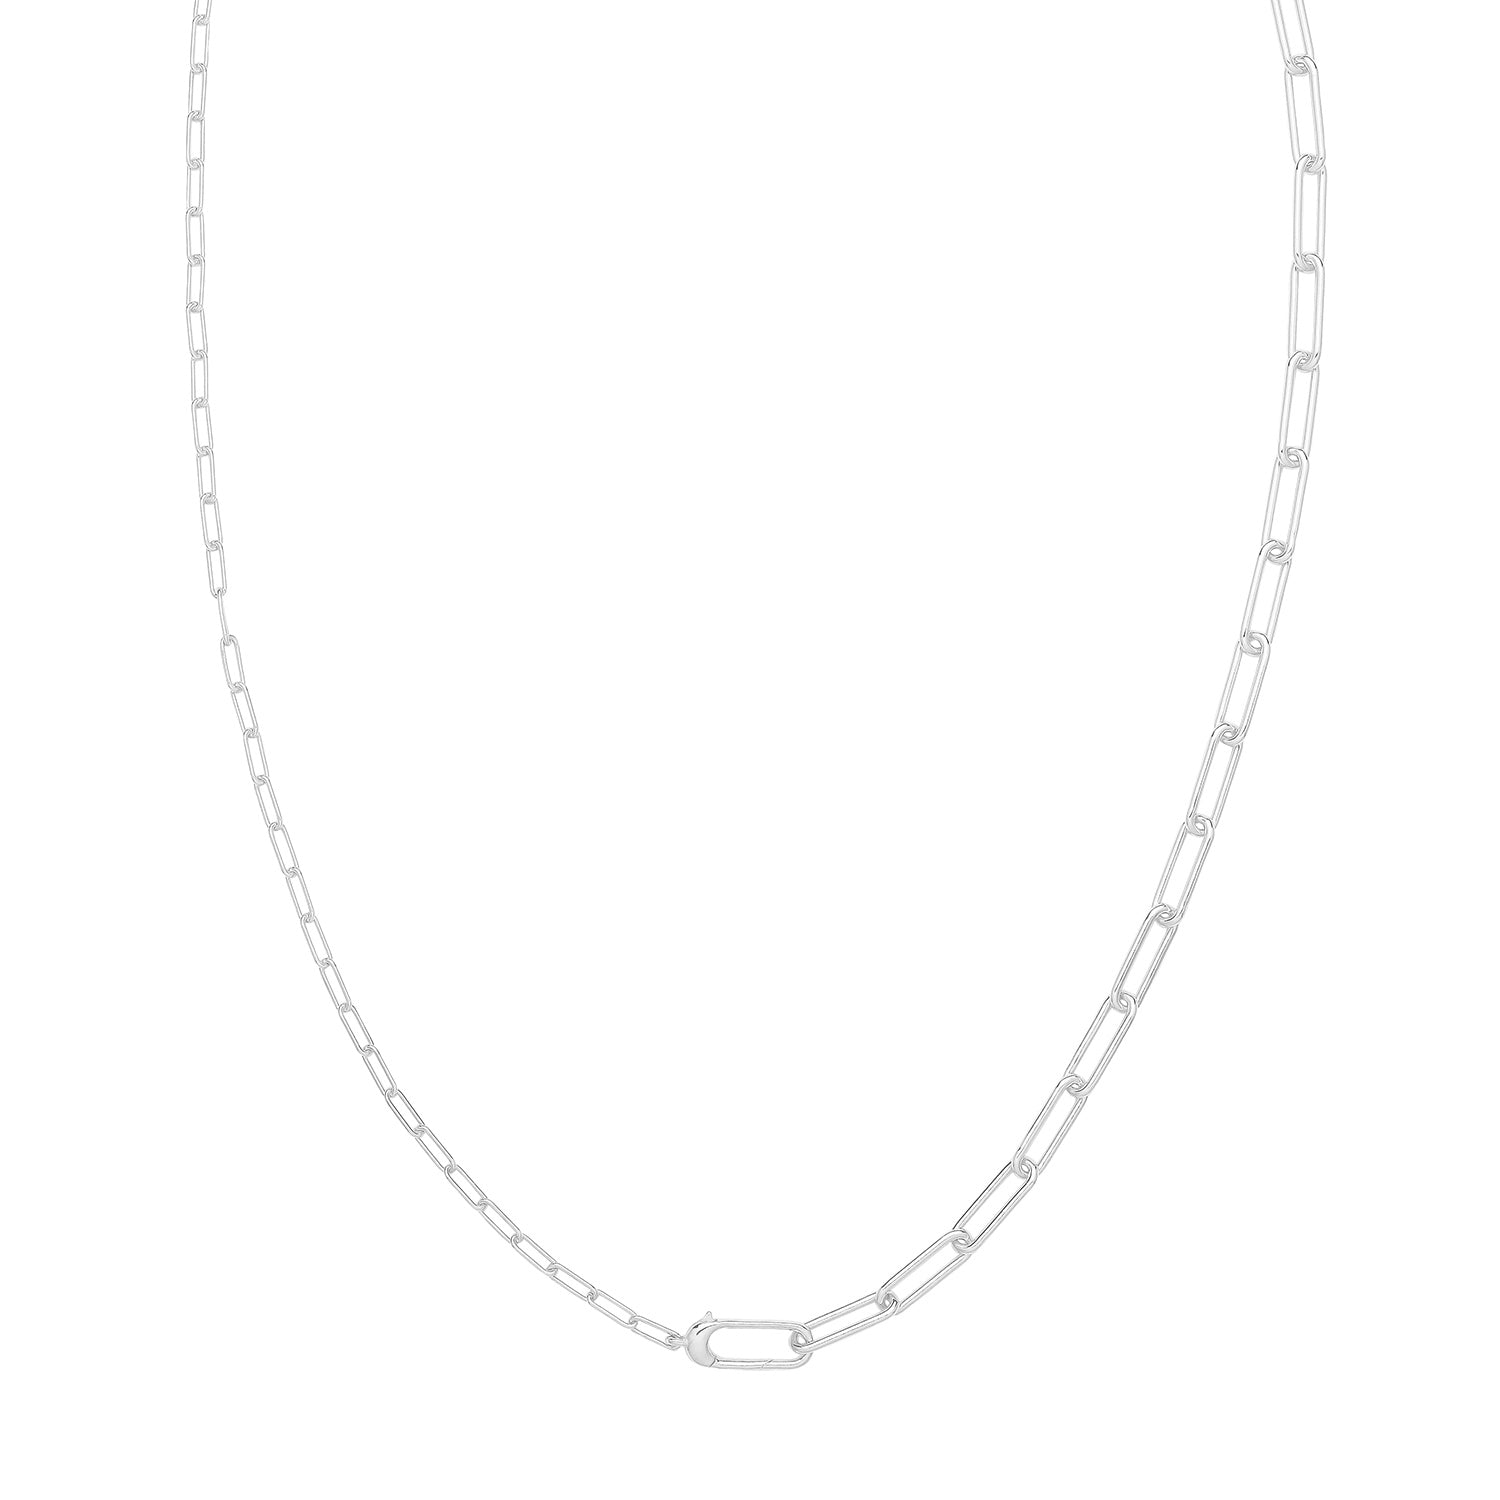 SILVER RHODIUM PLATED PAPERCLIP LINK NECKLET